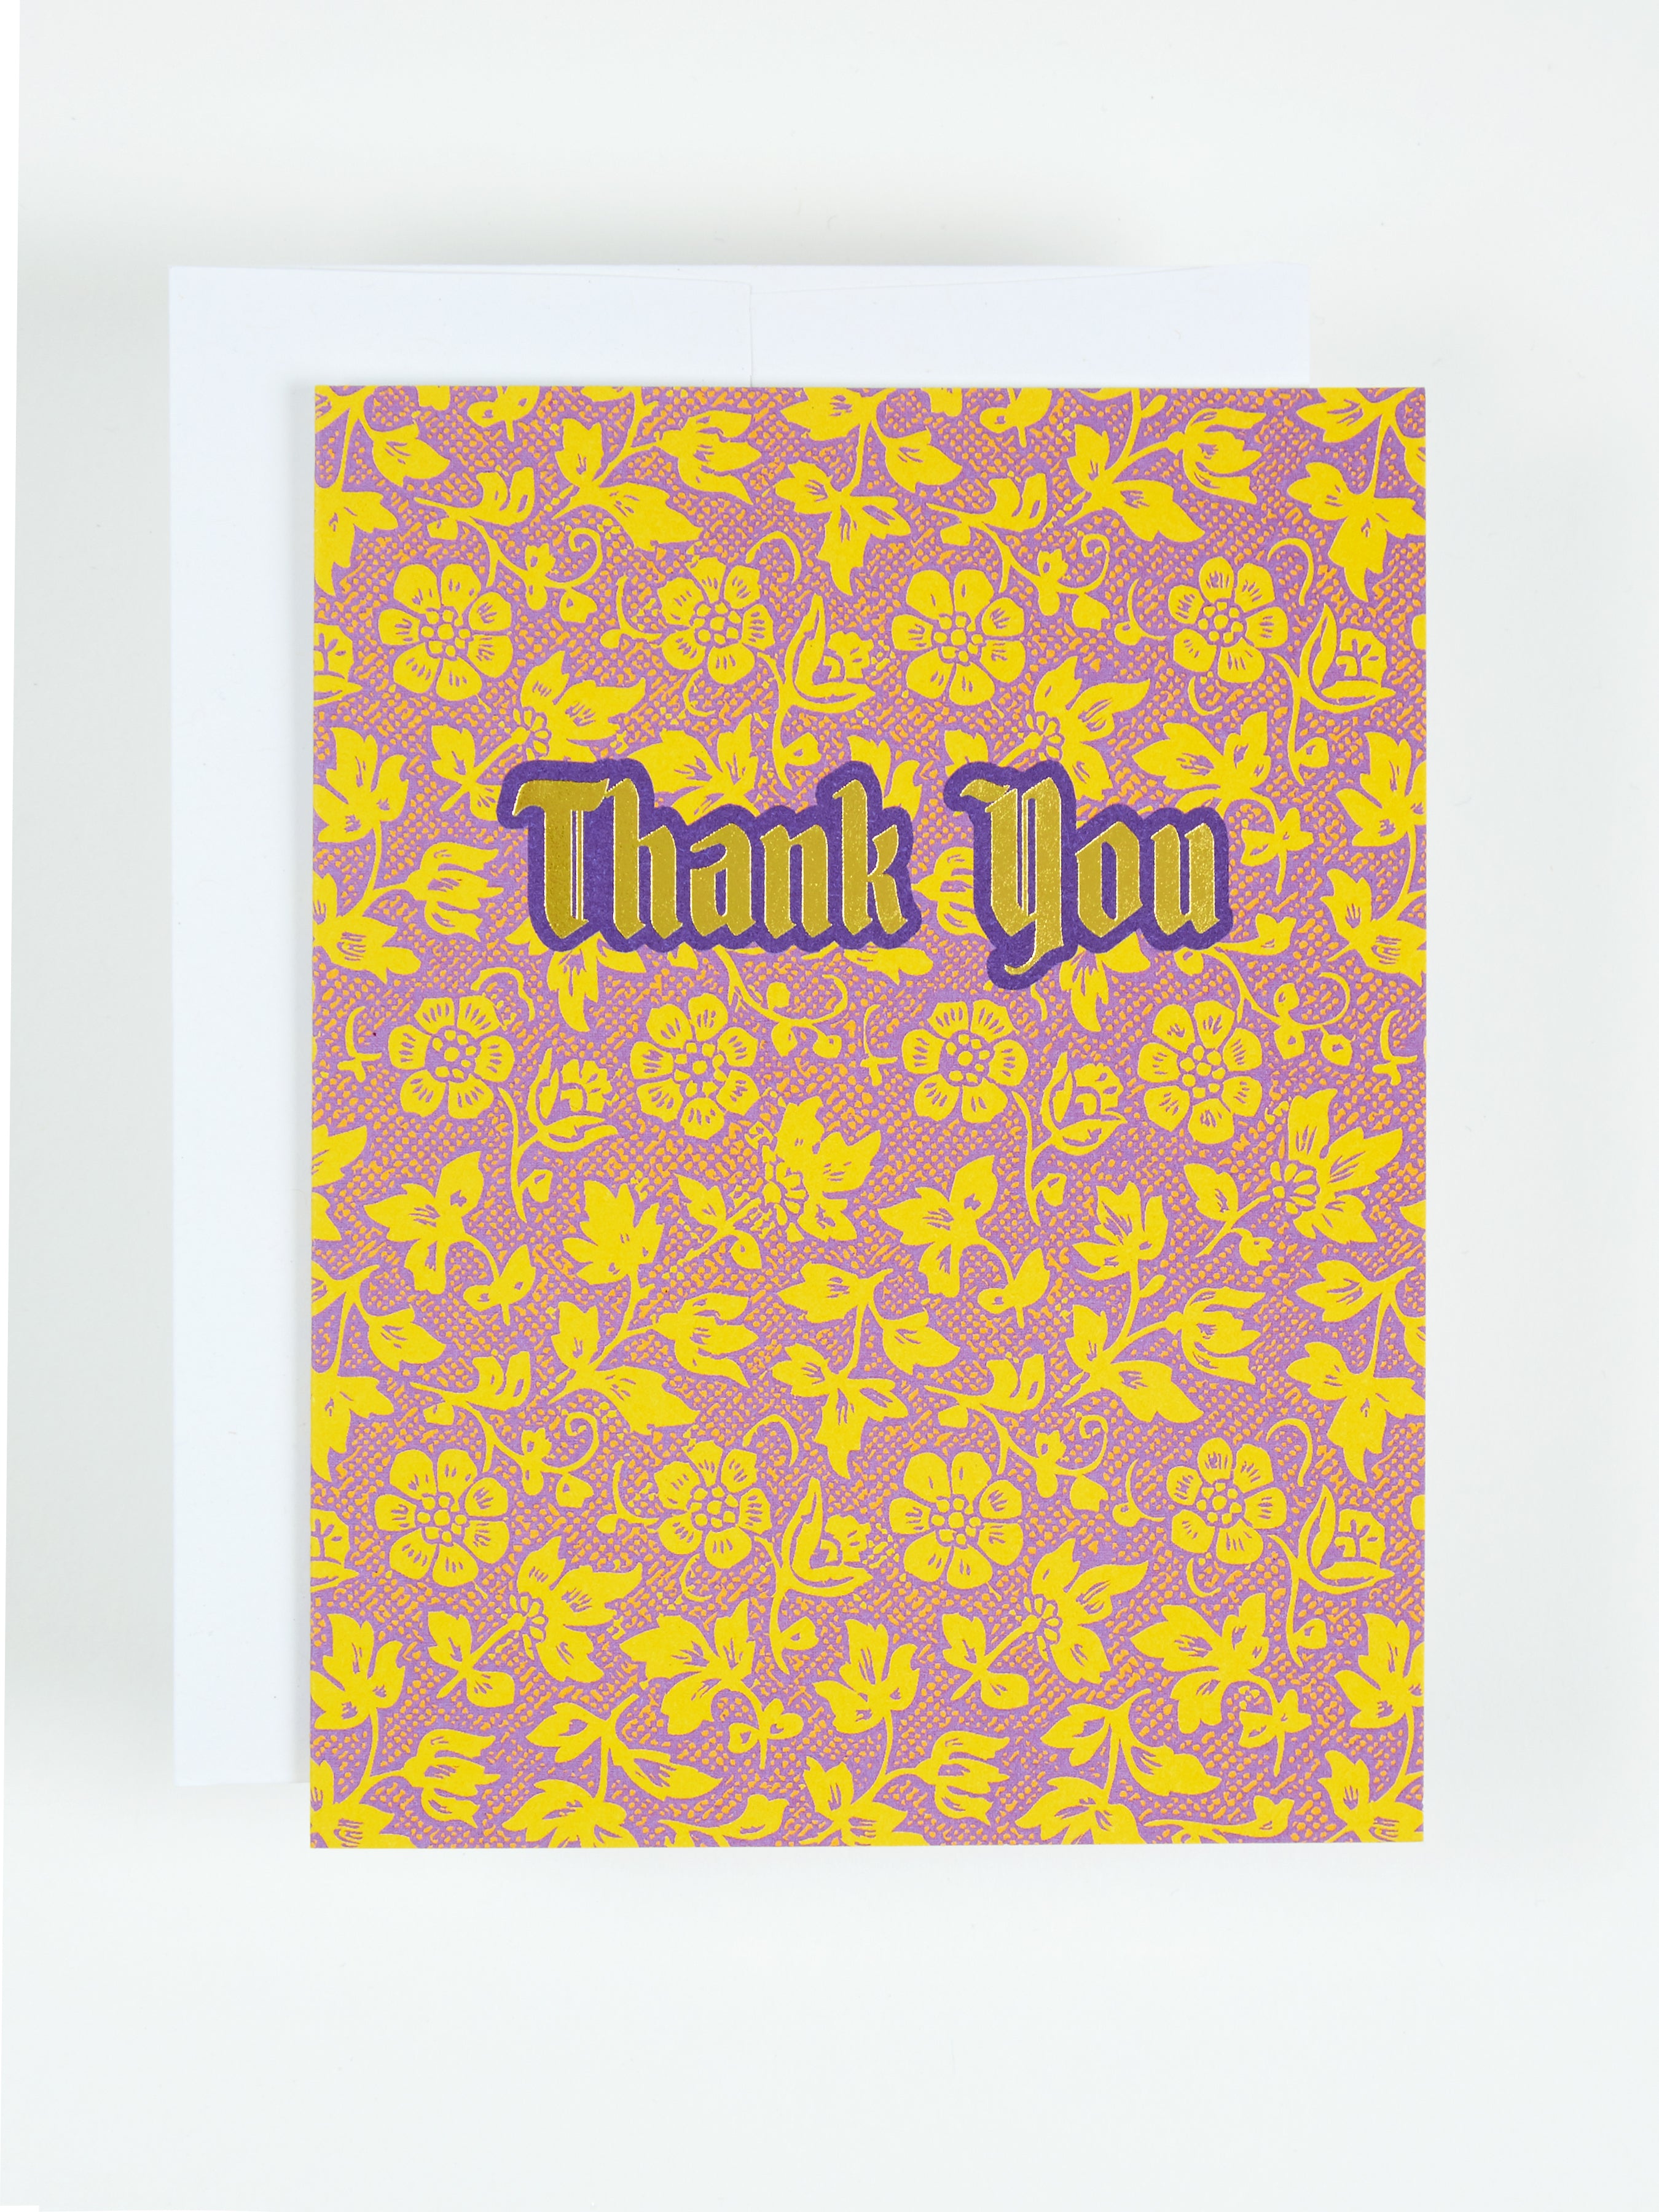 Greeting card featuring the text Thank You over a pattern of yellow flowers